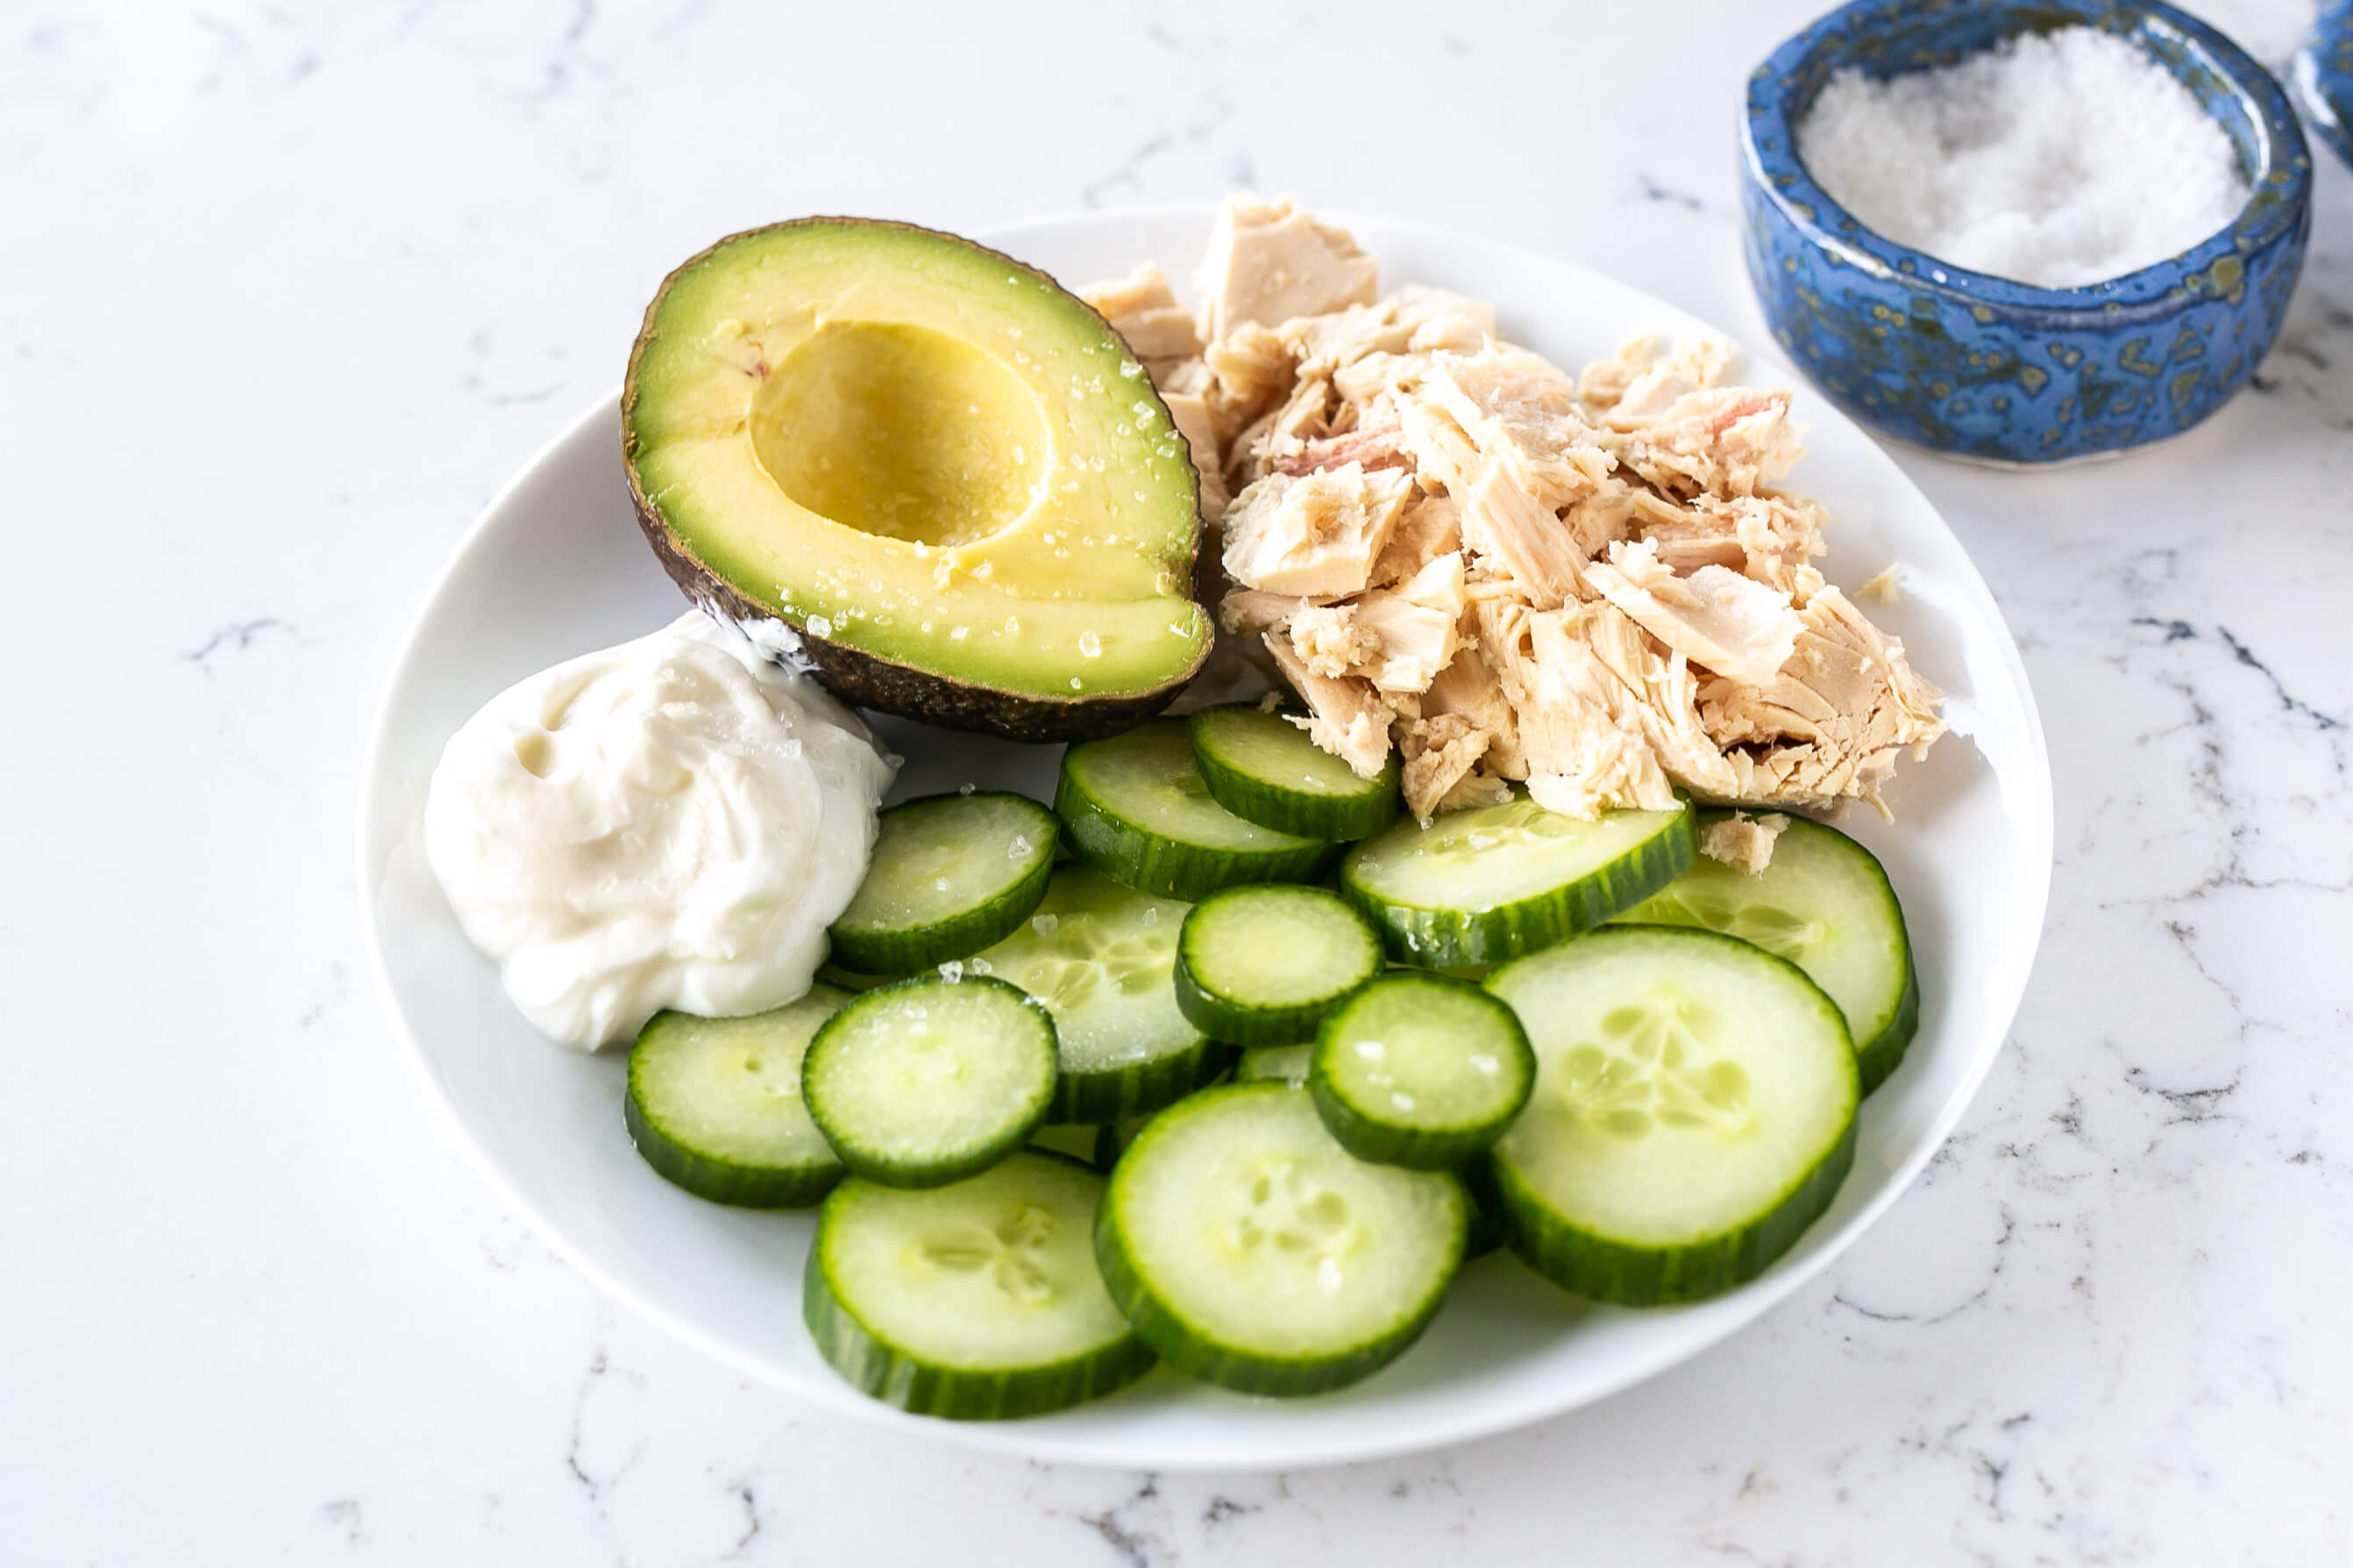 5 Ingredient Meal Ideas Your Clients Will Love: Tuna Salad Plate